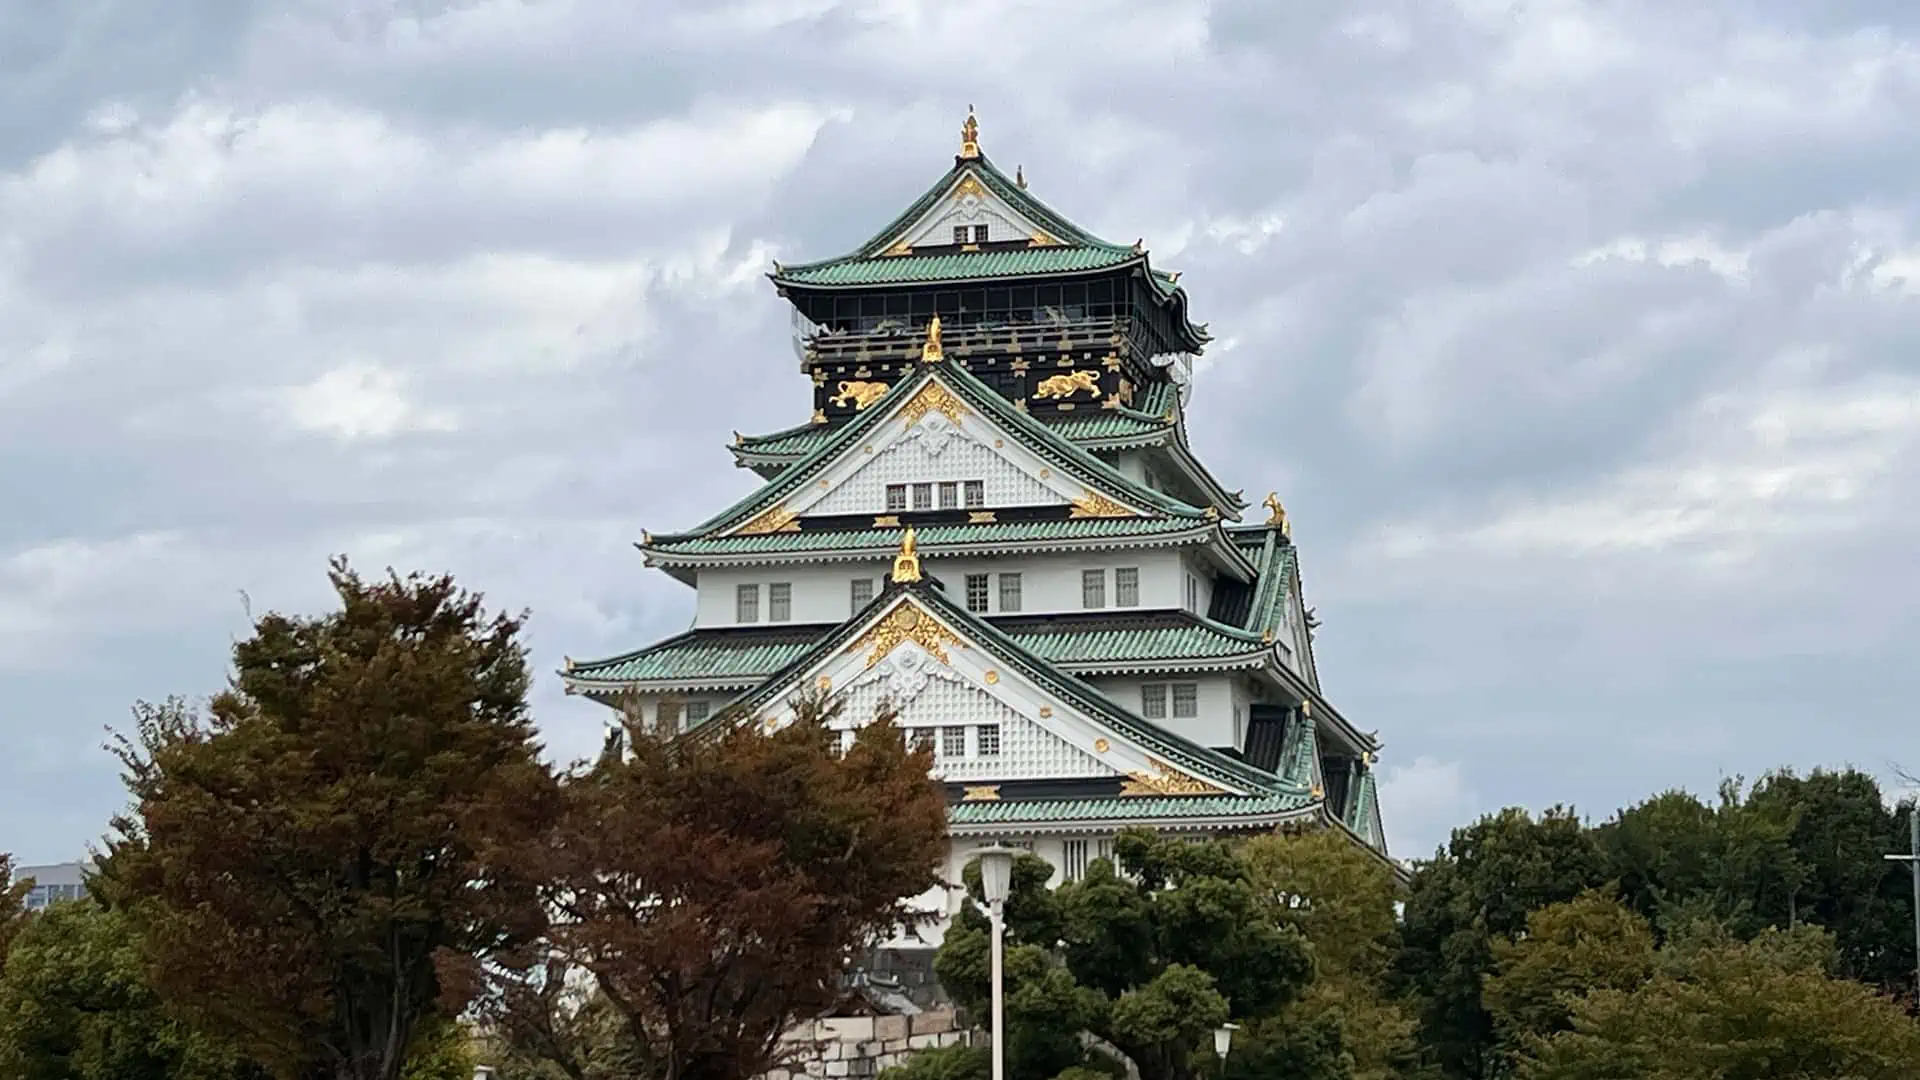 View of the top part of Osaka Castla visible from outside